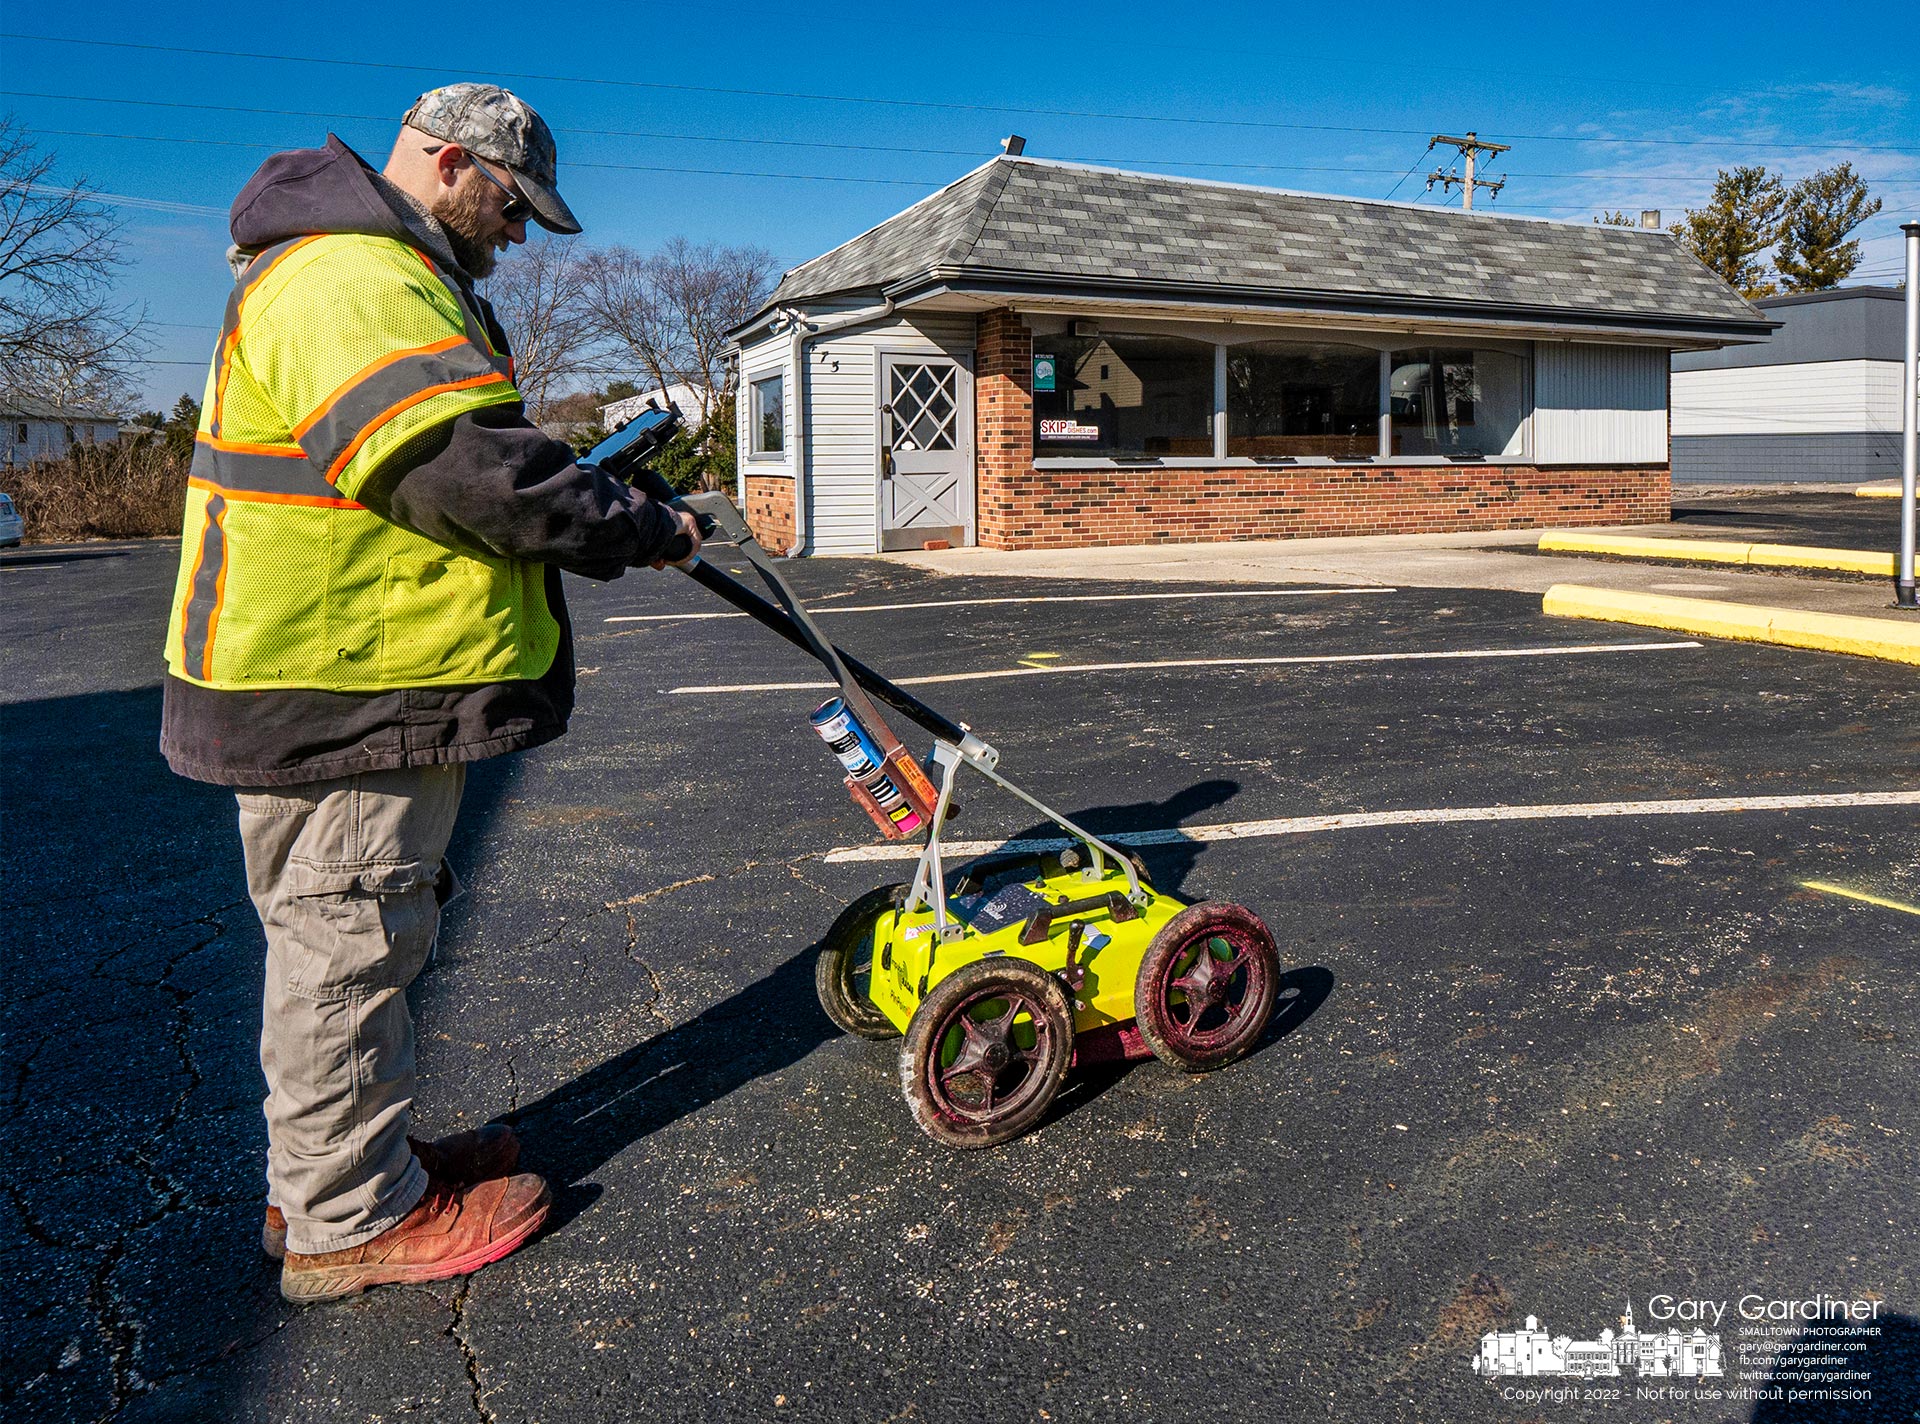 A surveyor checks data after using ground-penetrating radar to locate and catalog underground utilities at the old Yogi's Hoagies and two other buildings on South State that will be demolished to make way for a drive-thru Dunkin' donut store. My Final Photo for Feb. 28, 2022.